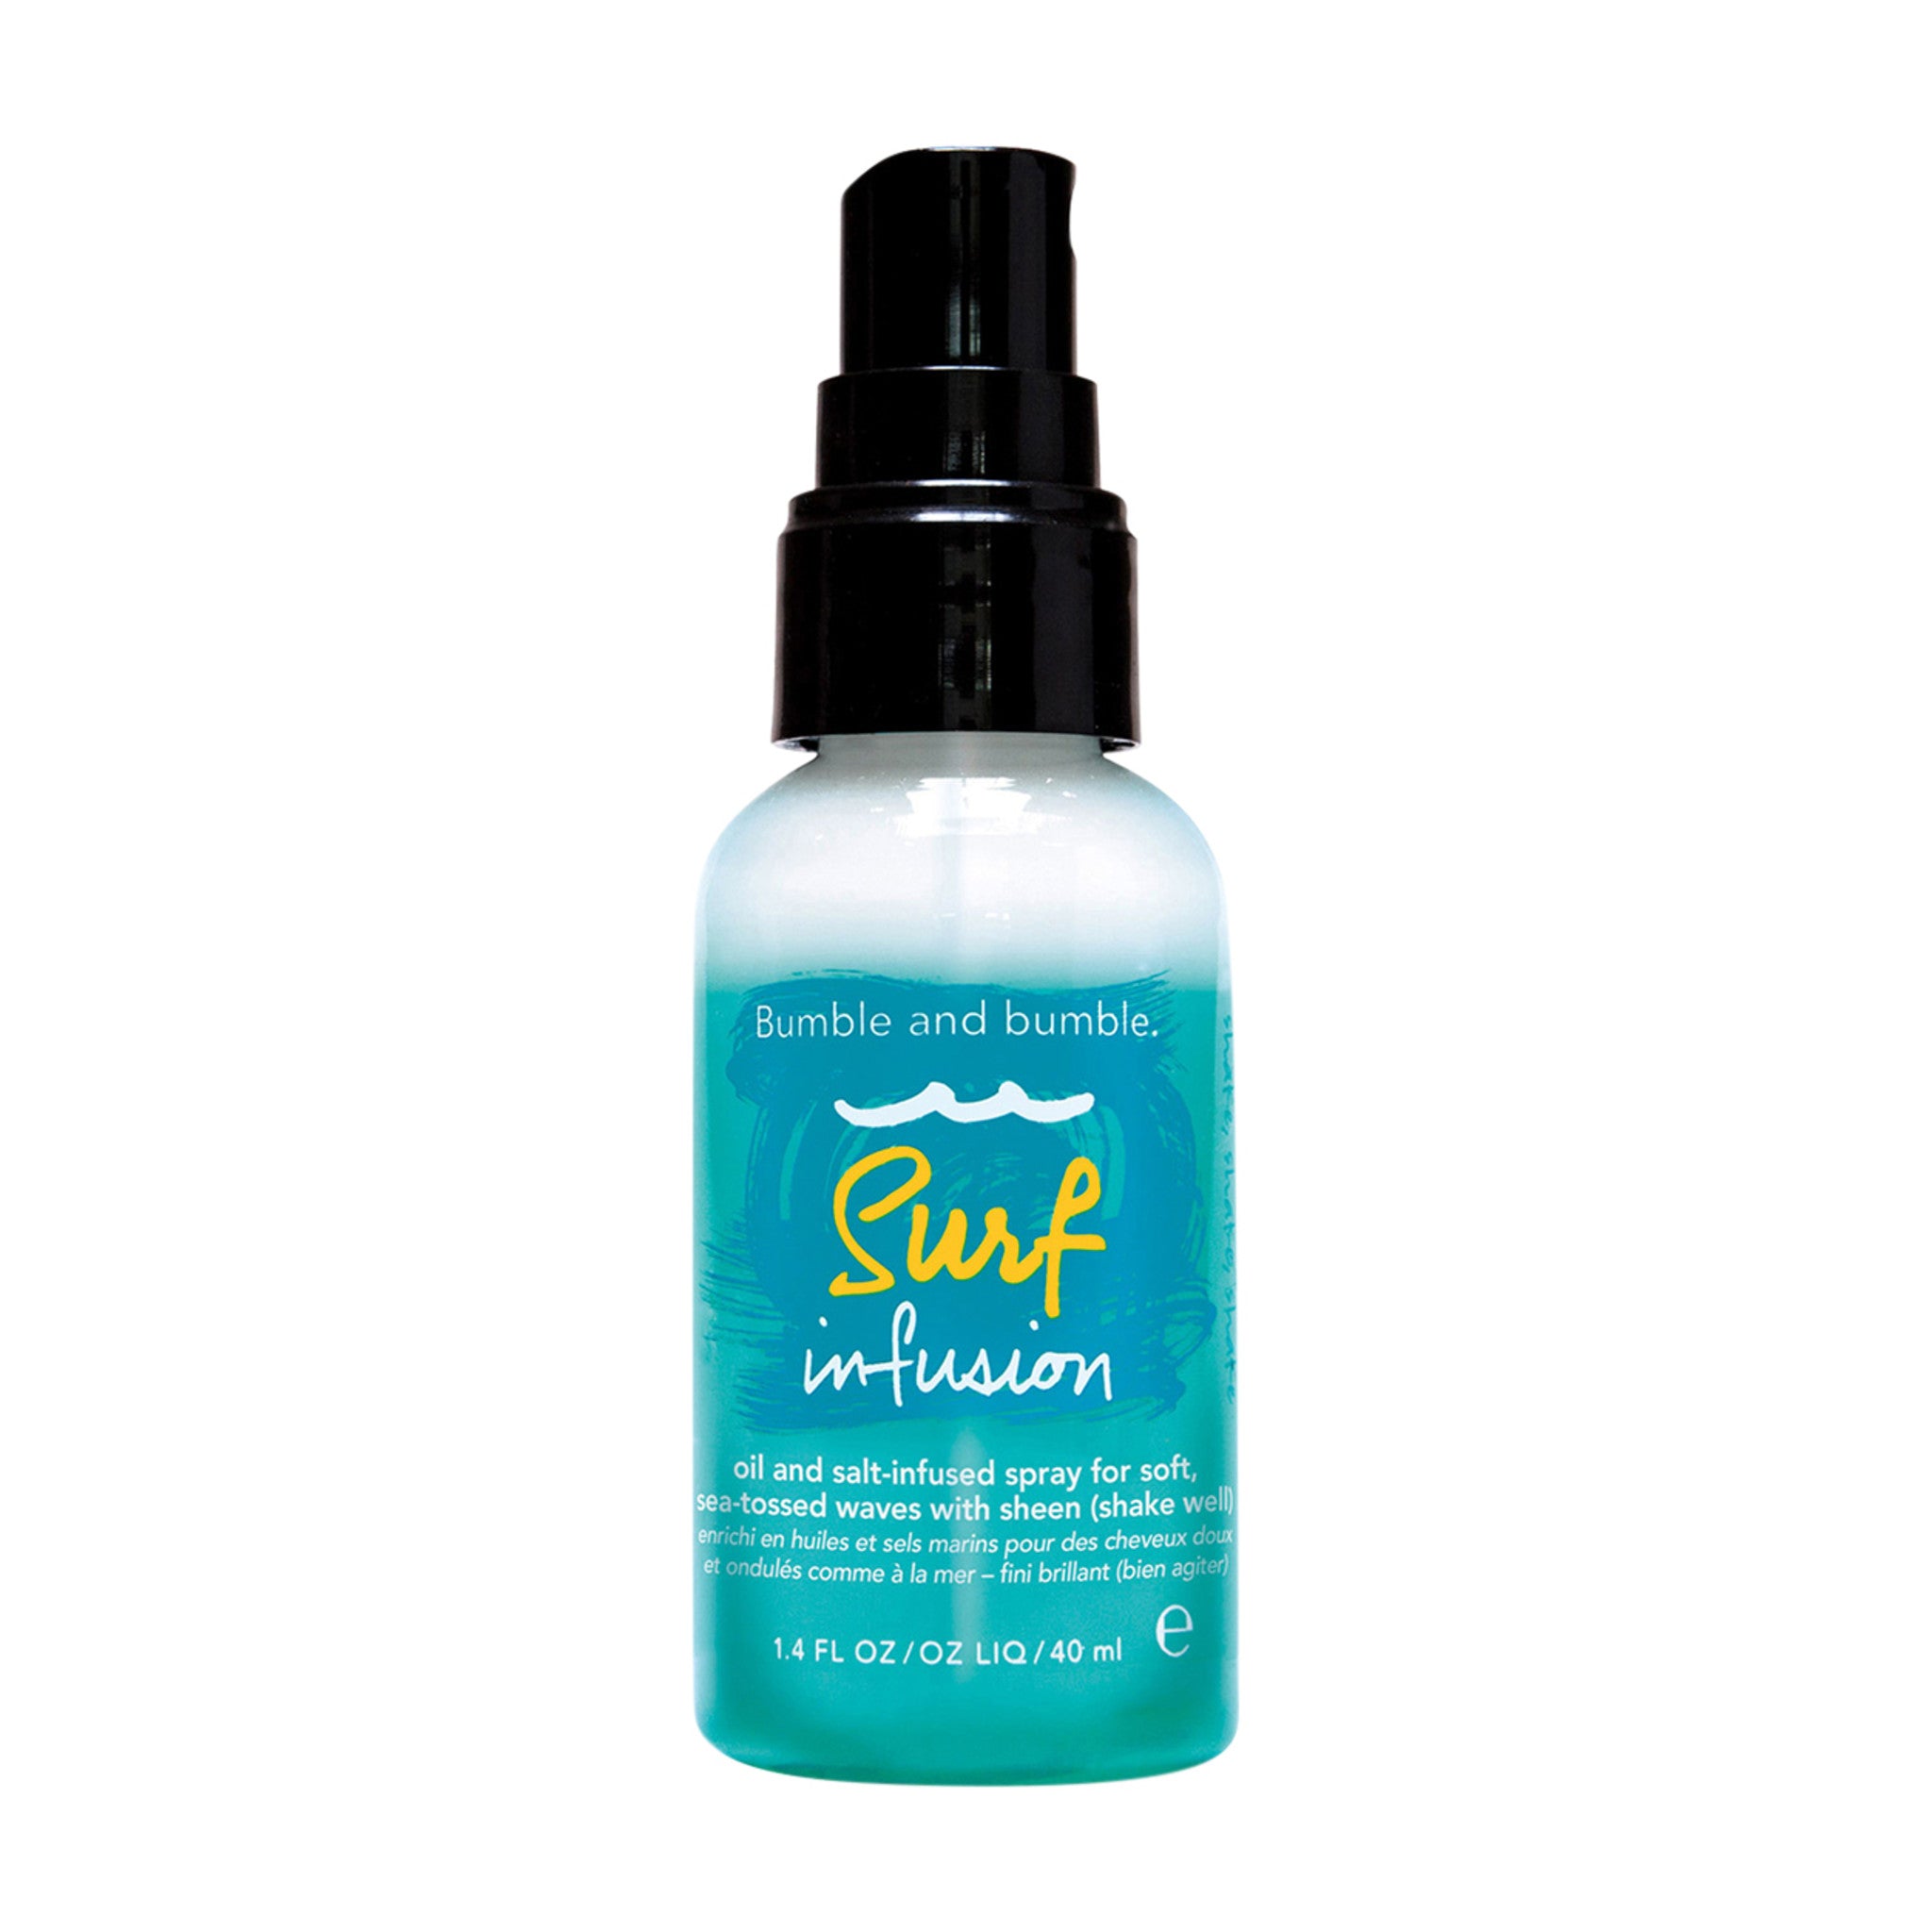 Bumble and Bumble Surf Infusion Size variant: 1.4 Oz main image.